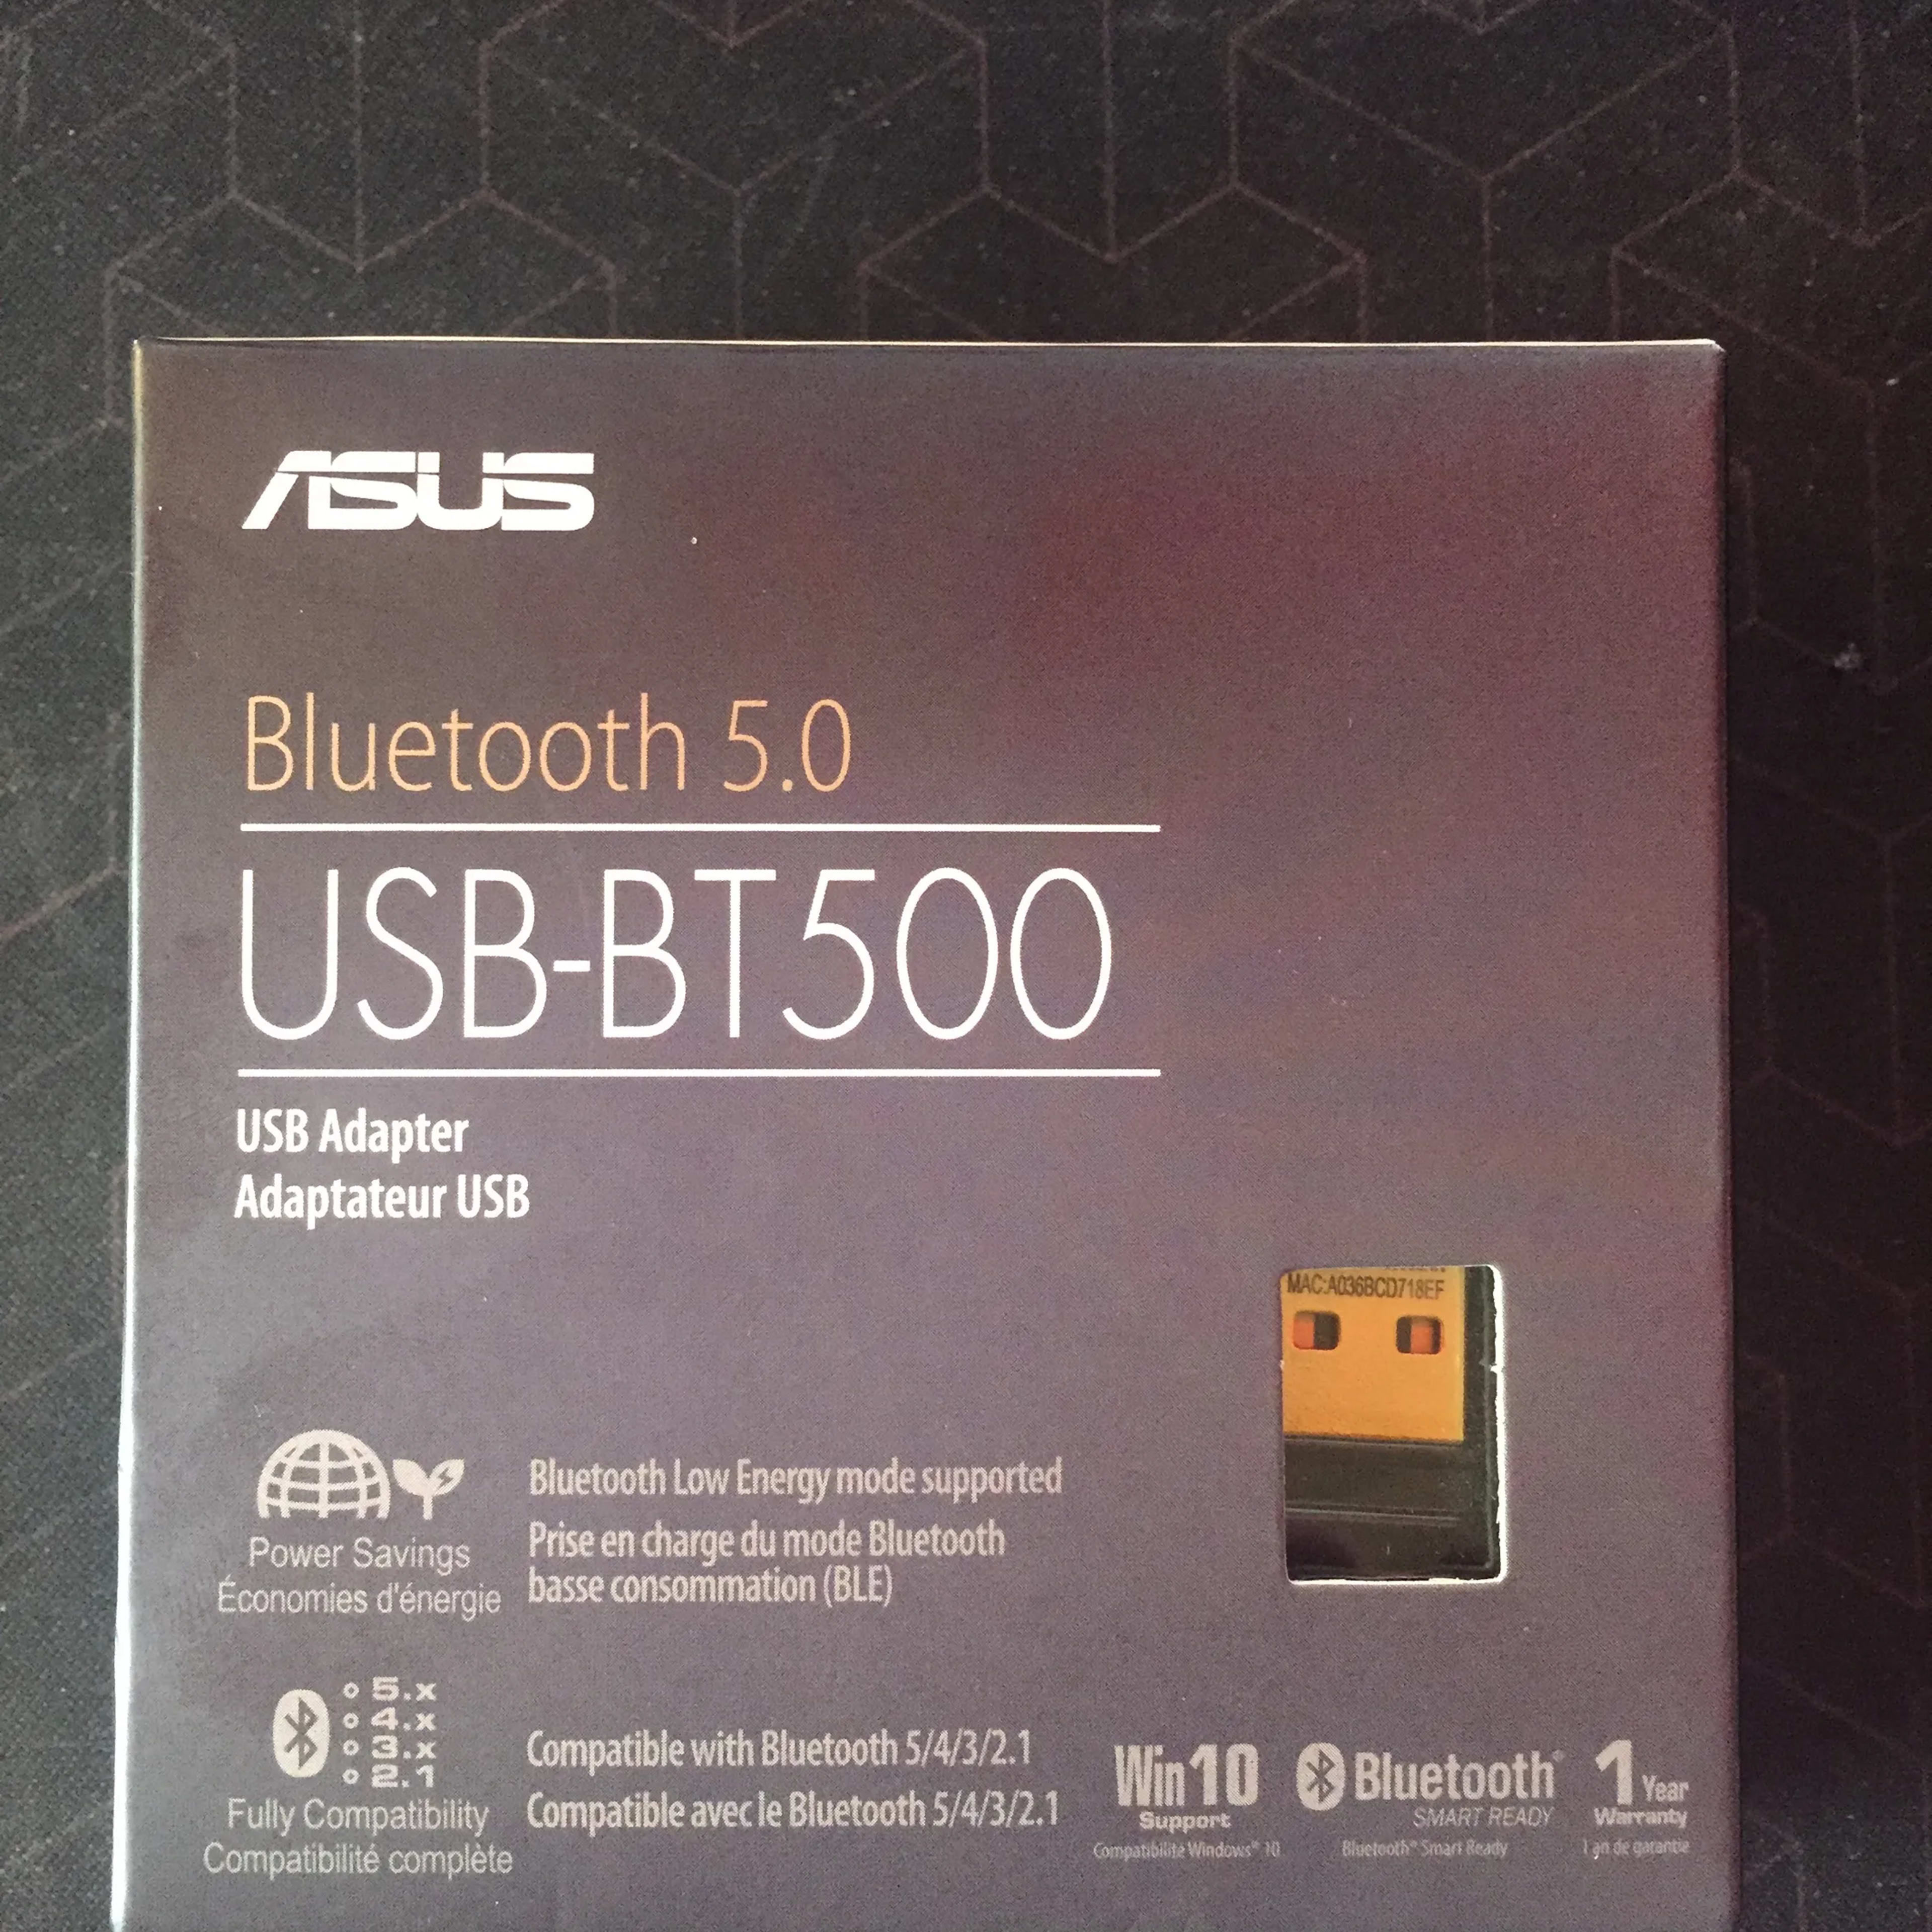 ASUS USB-BT500 Bluetooth 5.0 USB Adapter with Ultra Small Design